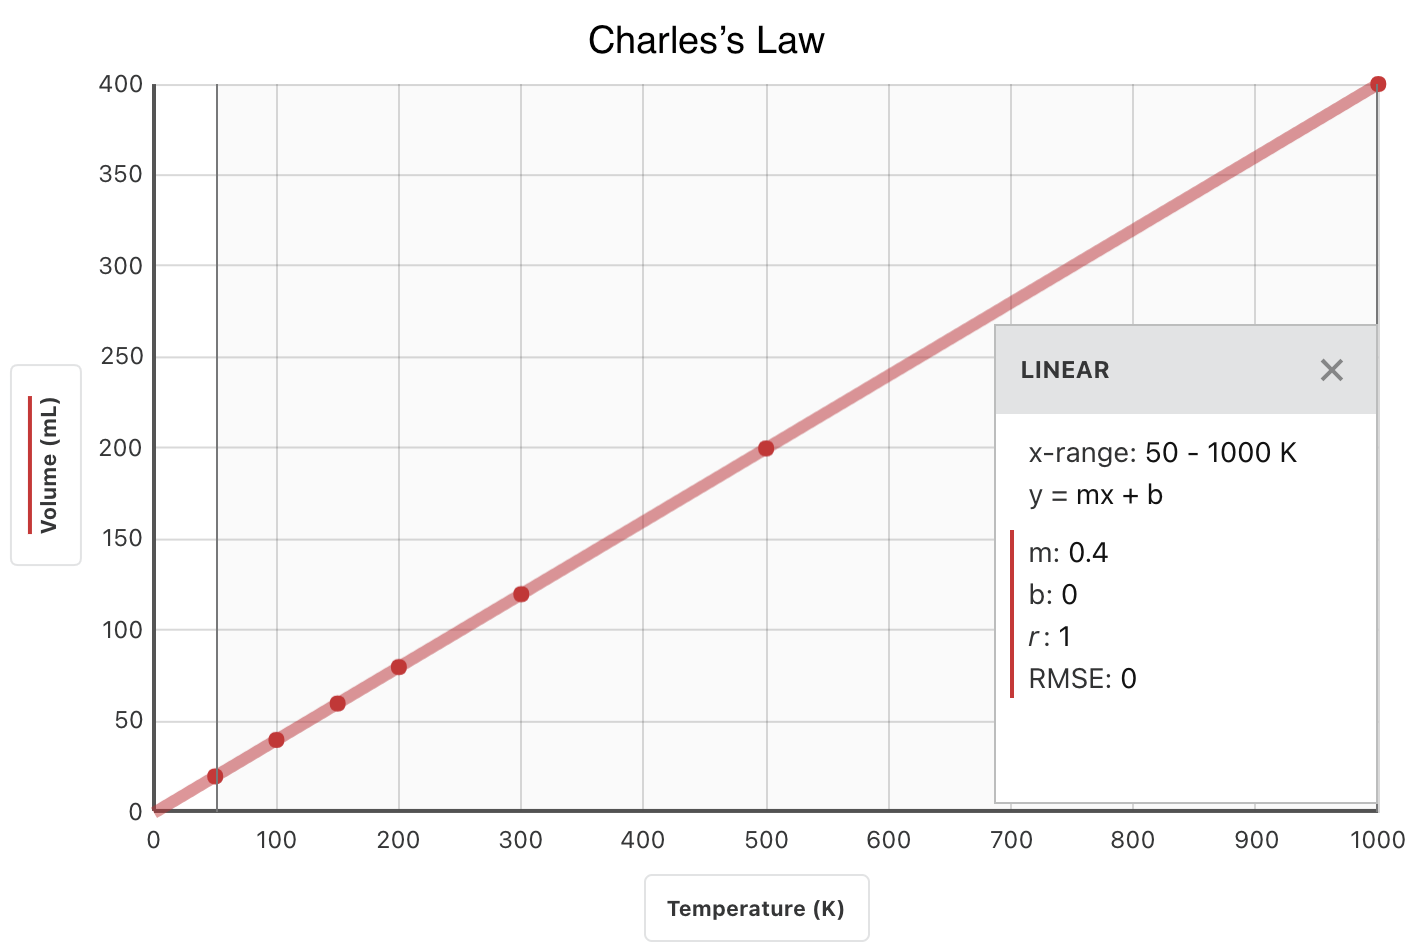 Graph of Charles's Law with an x-range of 50 to 1000 K. The slope is y = 0.4x + 0.